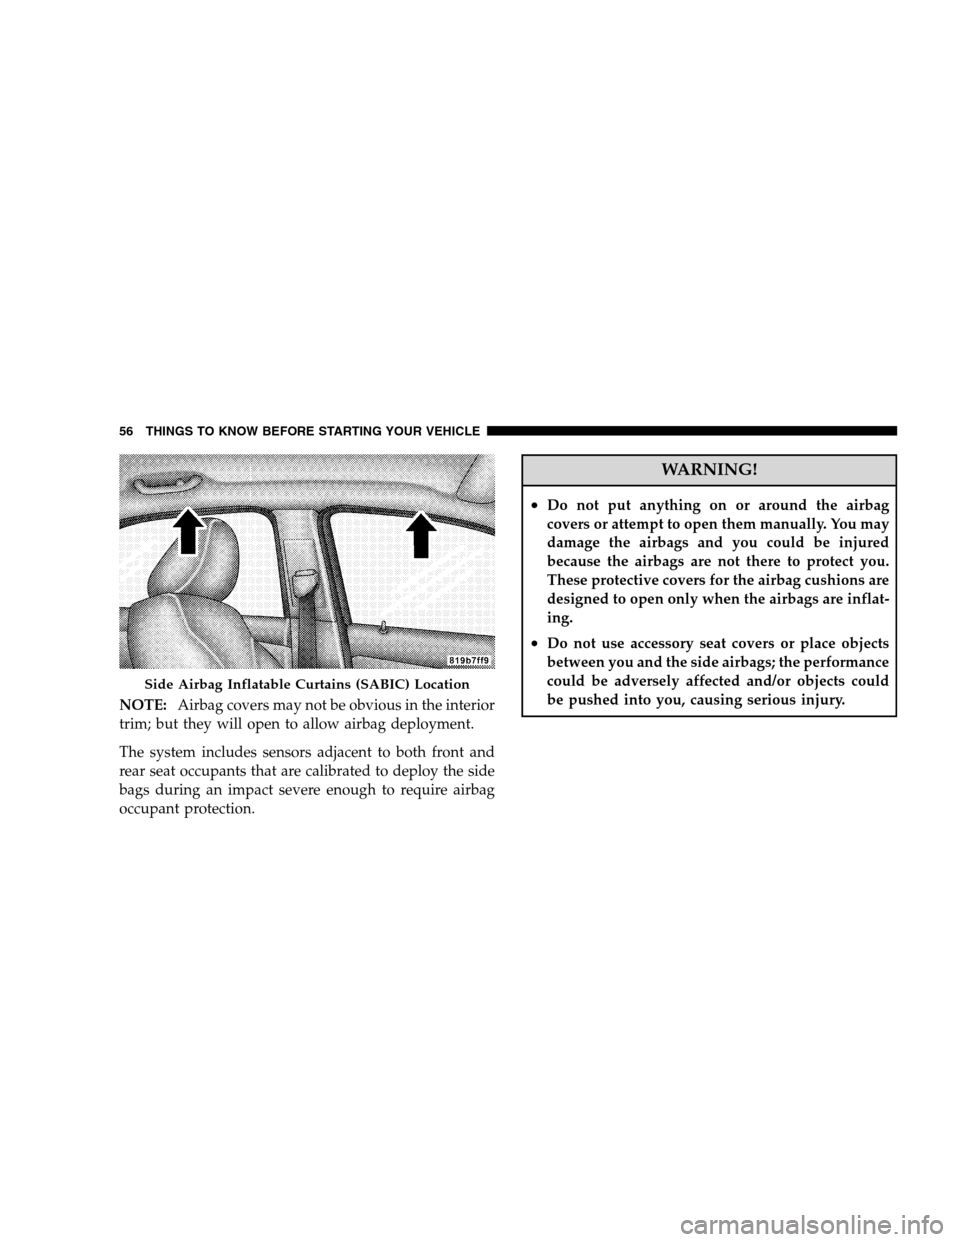 CHRYSLER SEBRING SEDAN 2008 3.G Owners Manual NOTE:Airbag covers may not be obvious in the interior
trim; but they will open to allow airbag deployment.
The system includes sensors adjacent to both front and
rear seat occupants that are calibrate